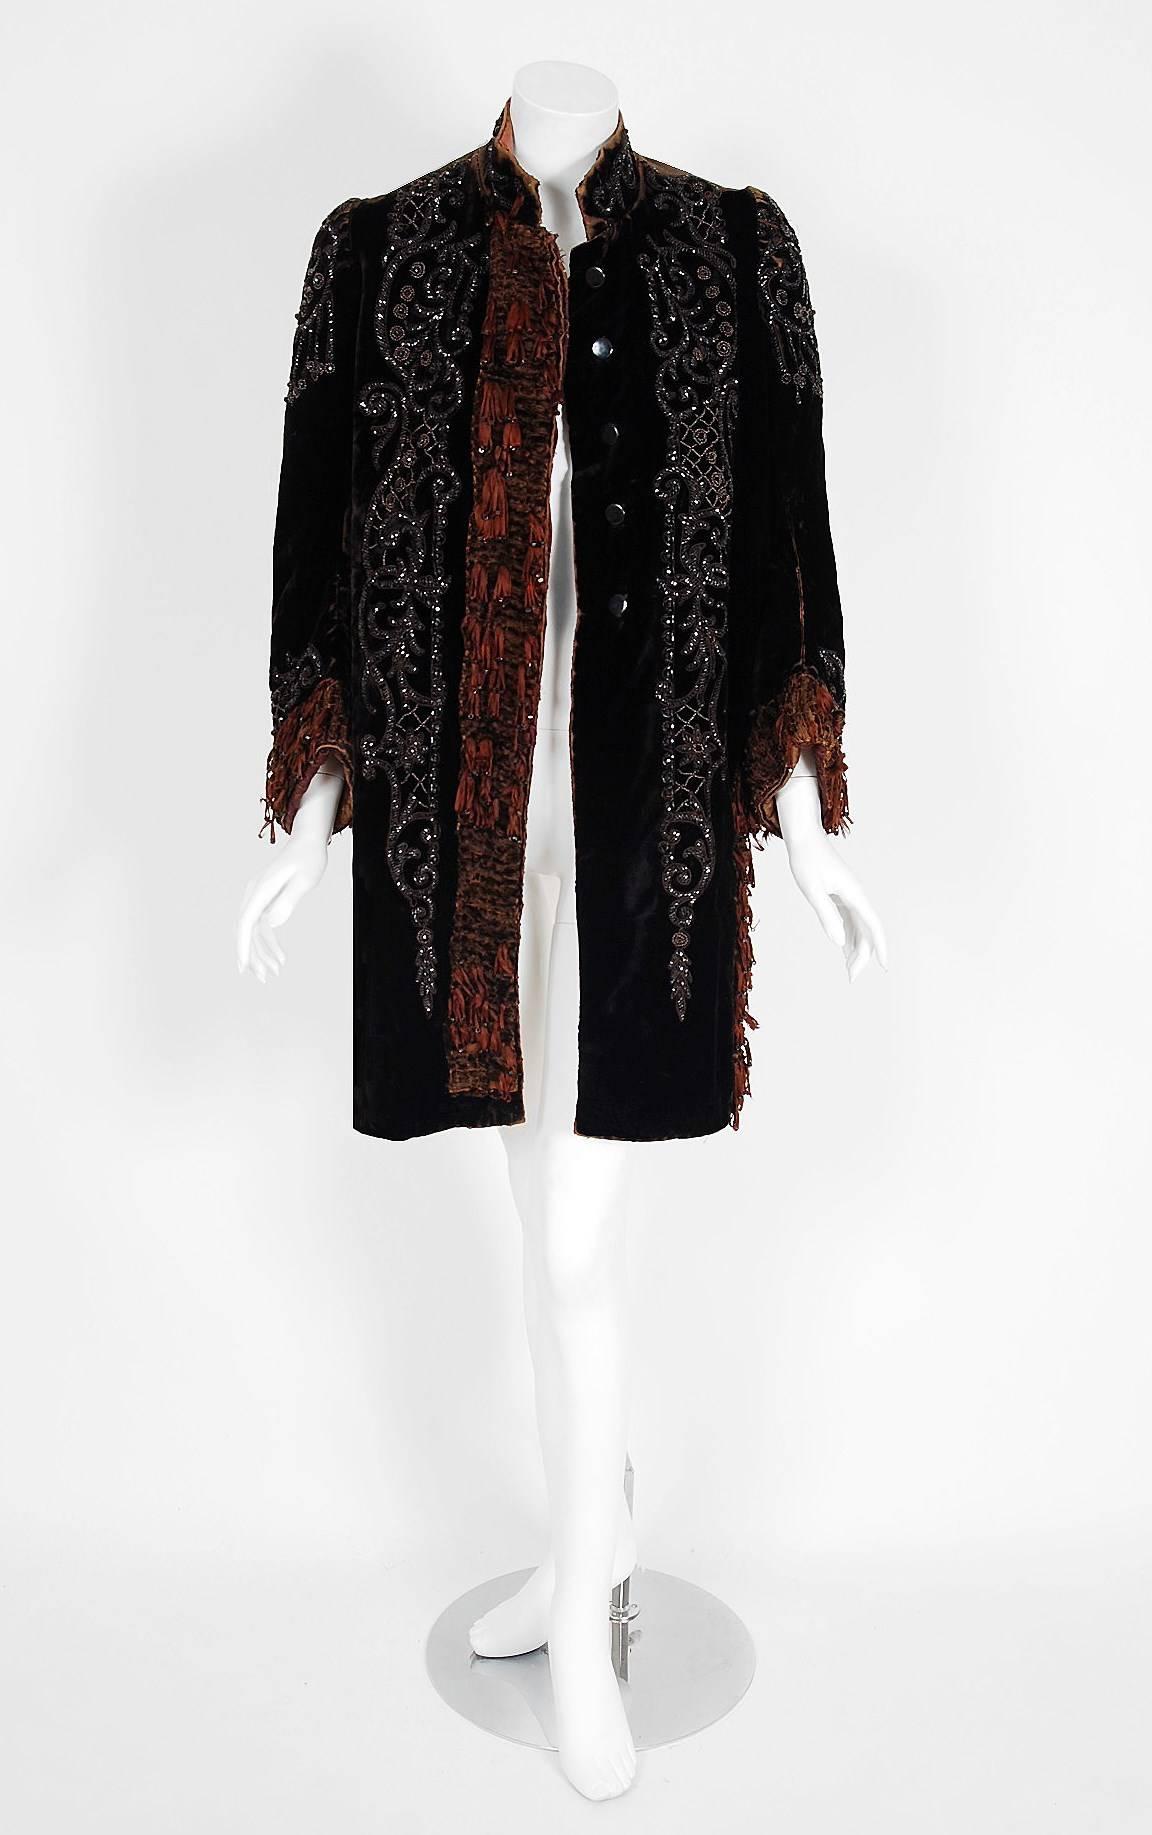 This dazzling custom-made Victorian Couture mantle jacket is lavishly embellished with sparkling jet-beads and silk-chenille fringe. The highly stylized beadwork perfectly captures the Art Nouveau aesthetic, then at a peak of popularity. Rich